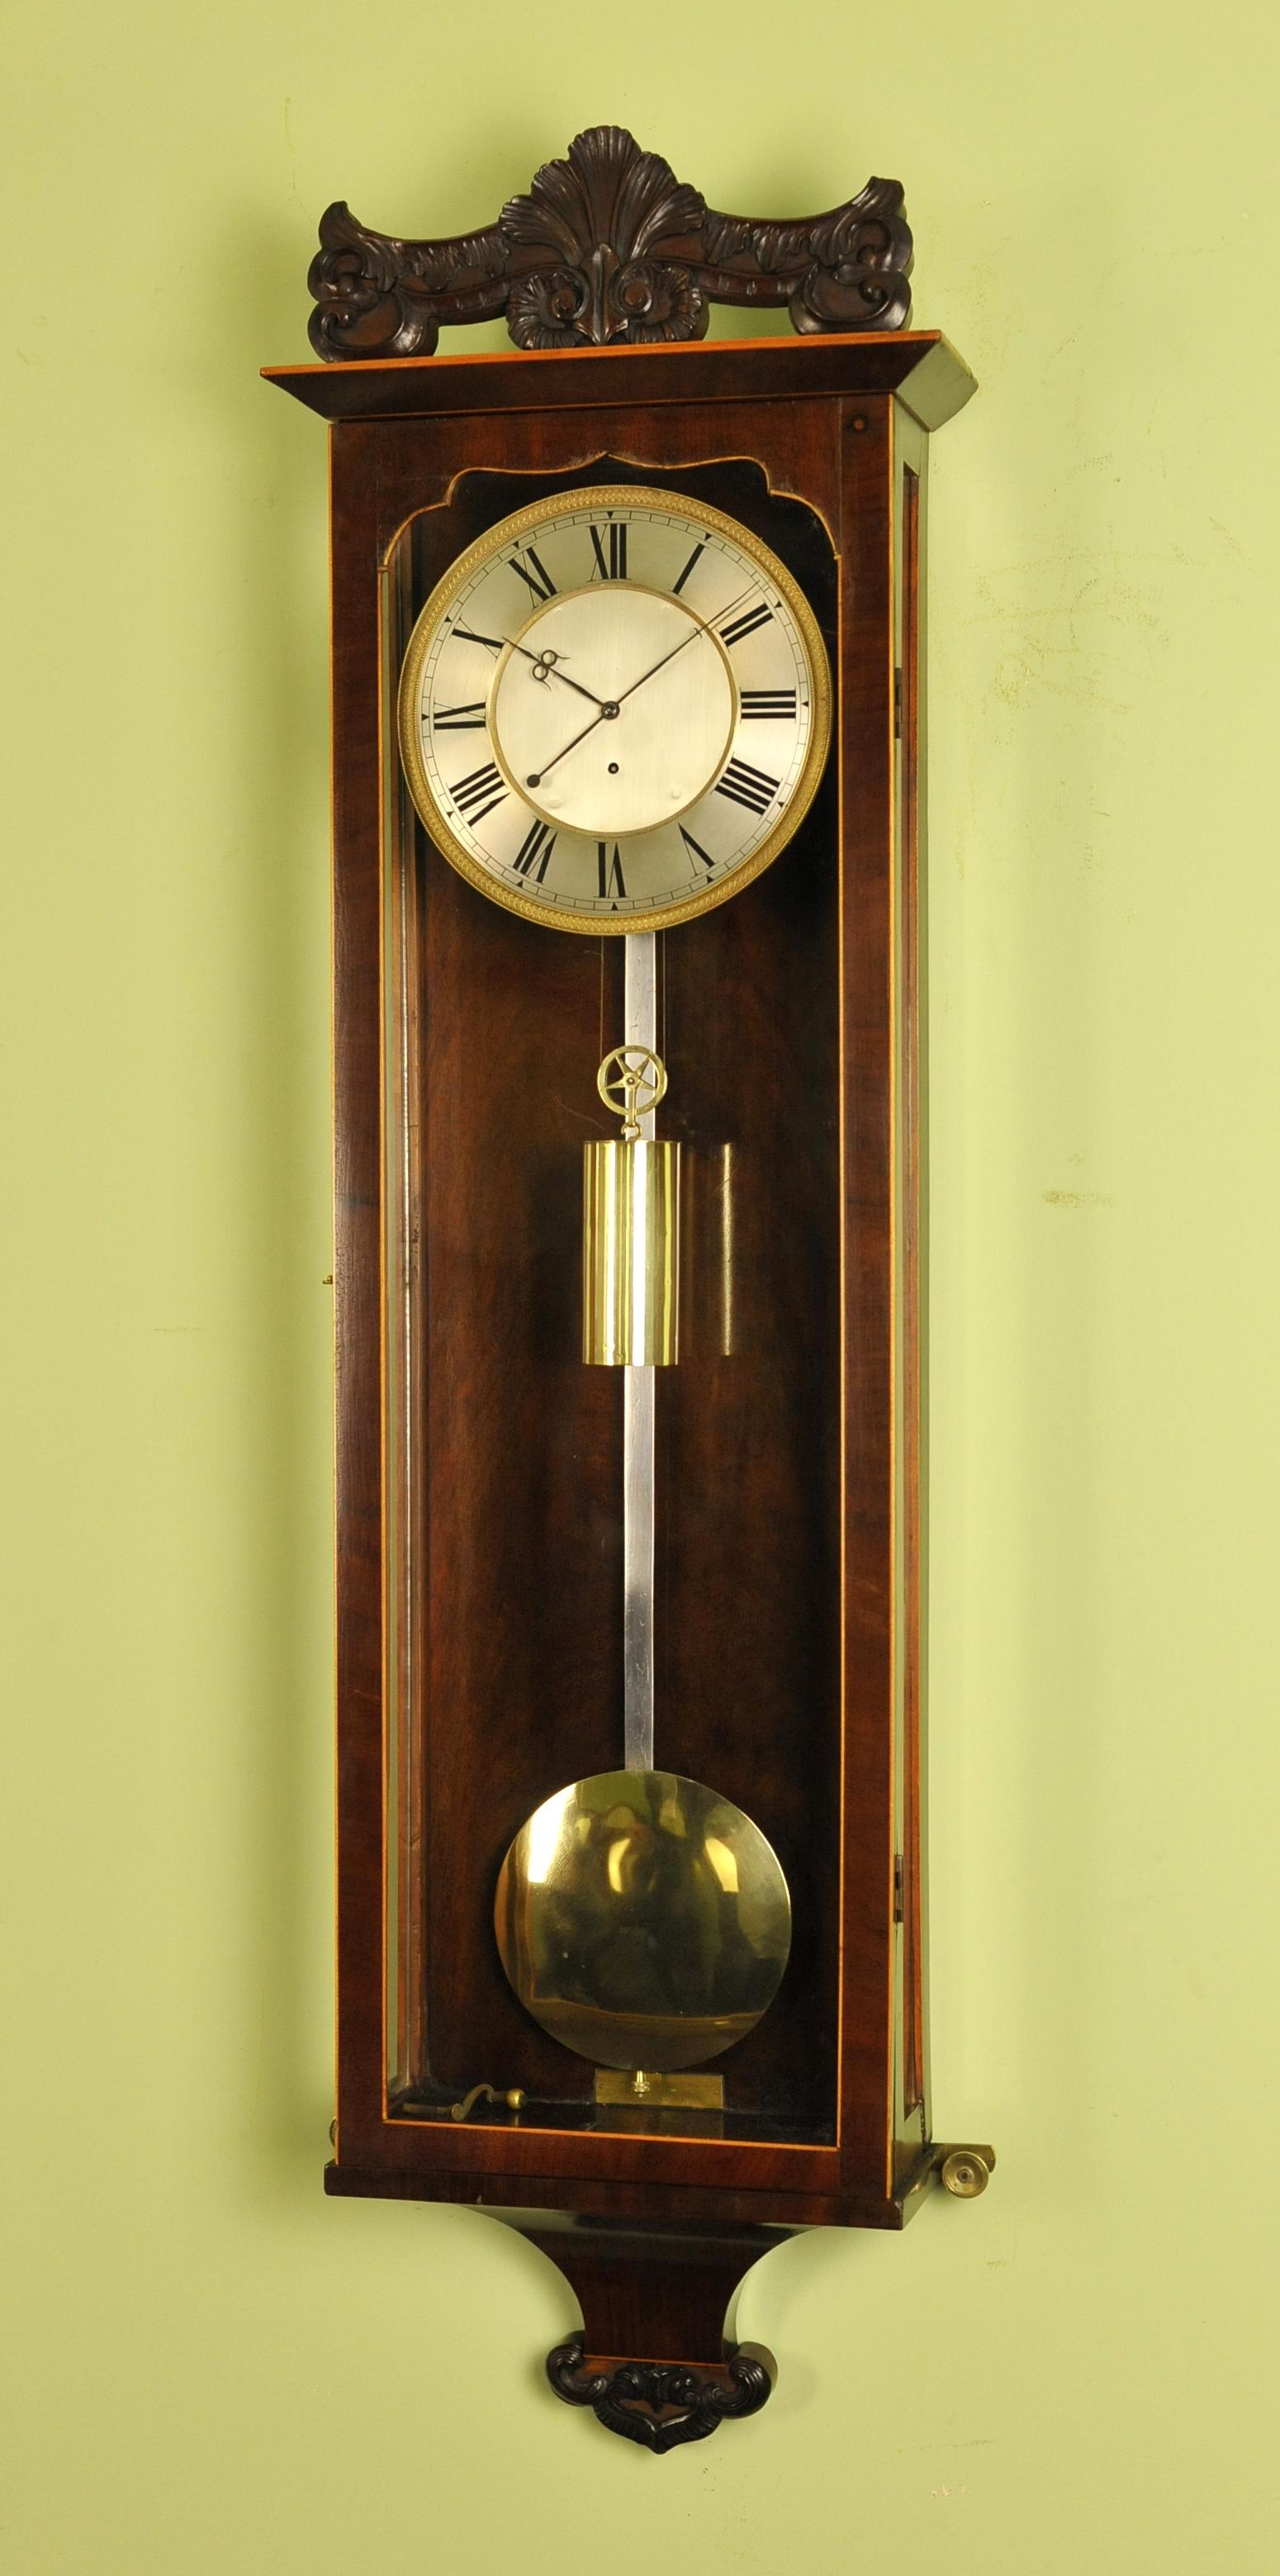 It is a pleasure to offer this very rare true Vienna regulator wall clock which has the feature of silk suspension which is something we have seen on only one other Vienna Regulator. It will date circa 1840
Austrian clocks such as this are entirely